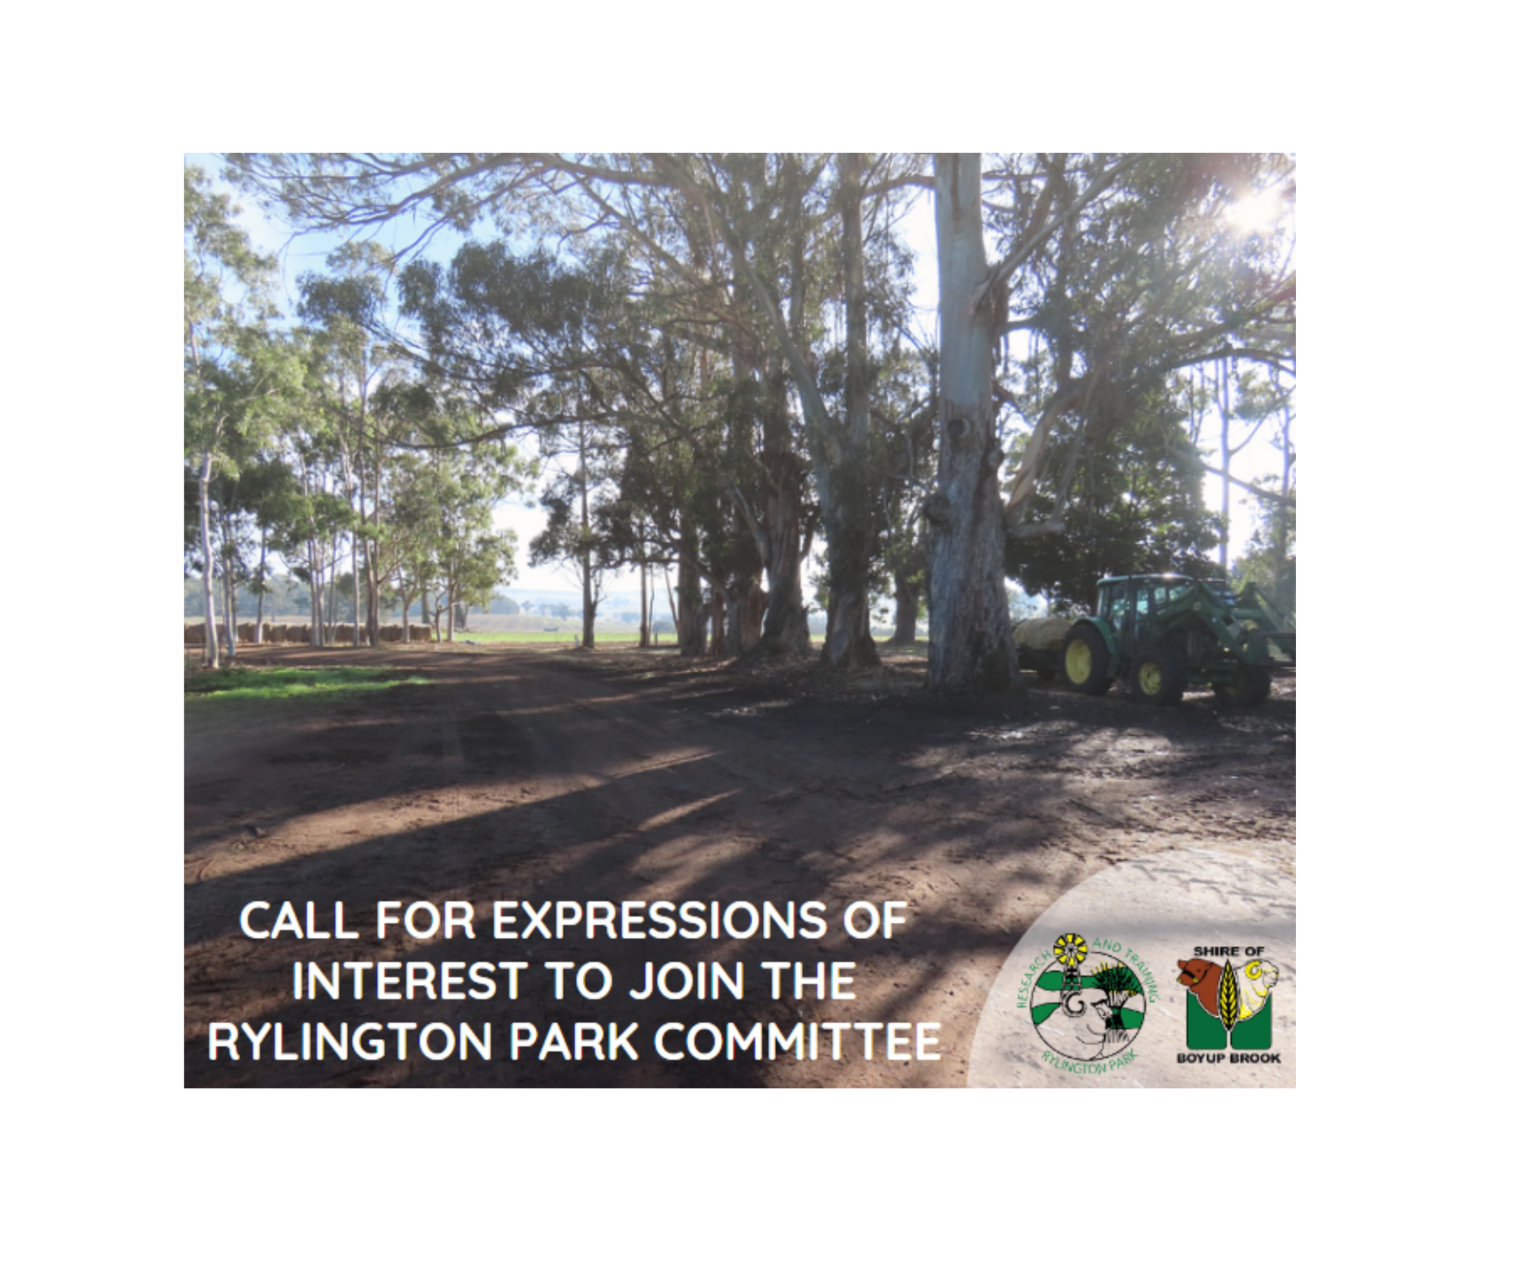 Call for Expression of Interest to join the Rylington Park Committee